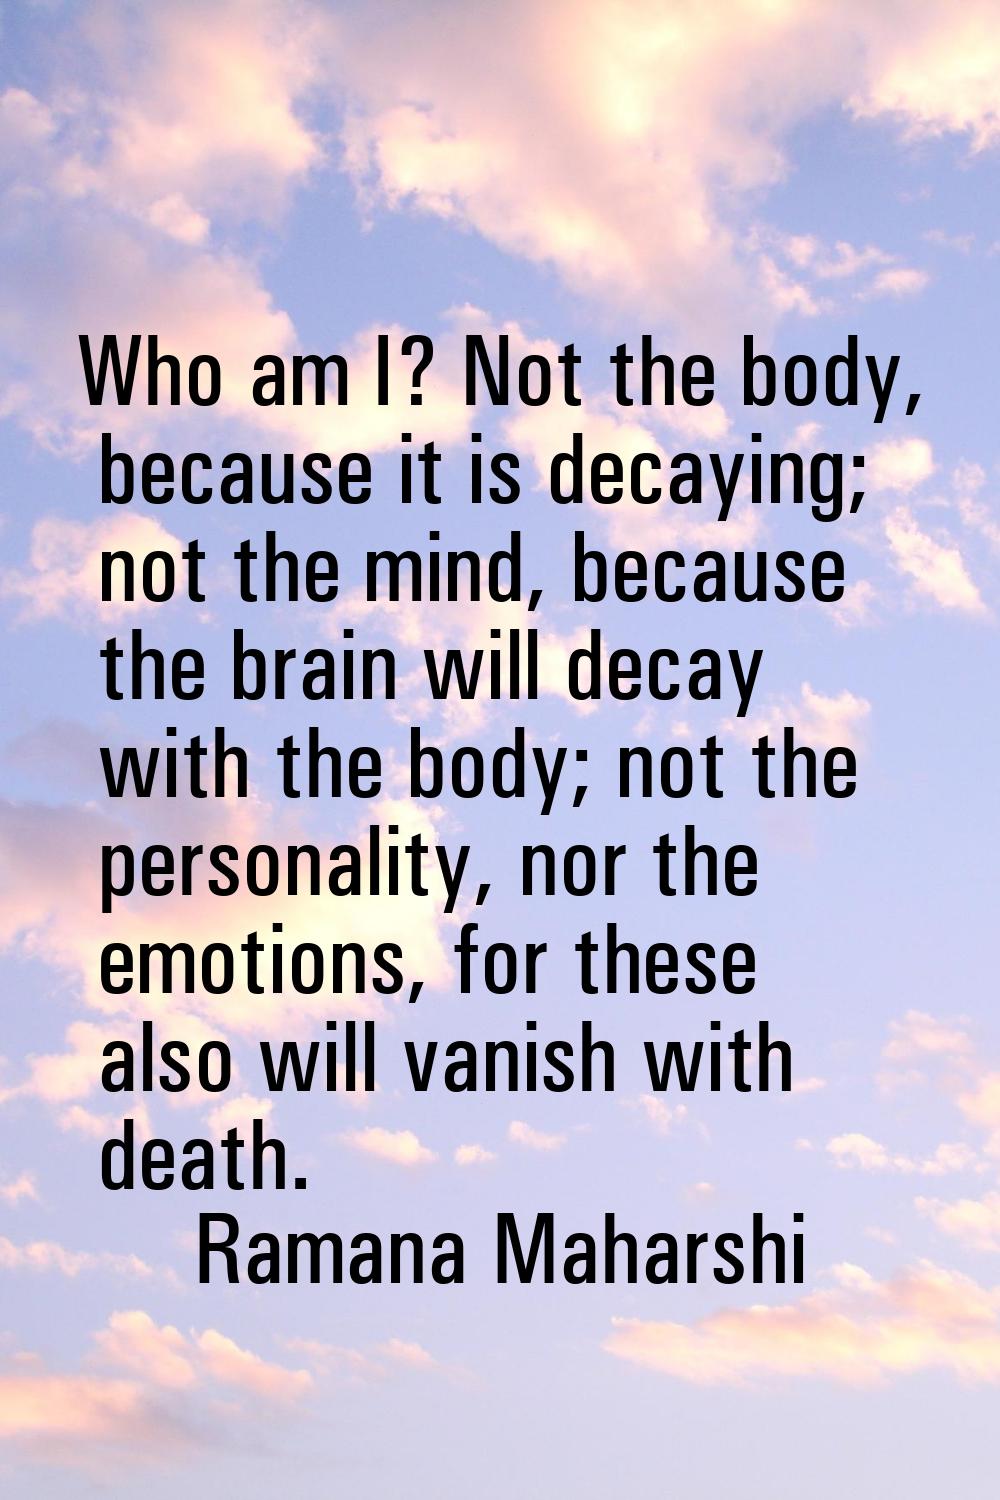 Who am I? Not the body, because it is decaying; not the mind, because the brain will decay with the